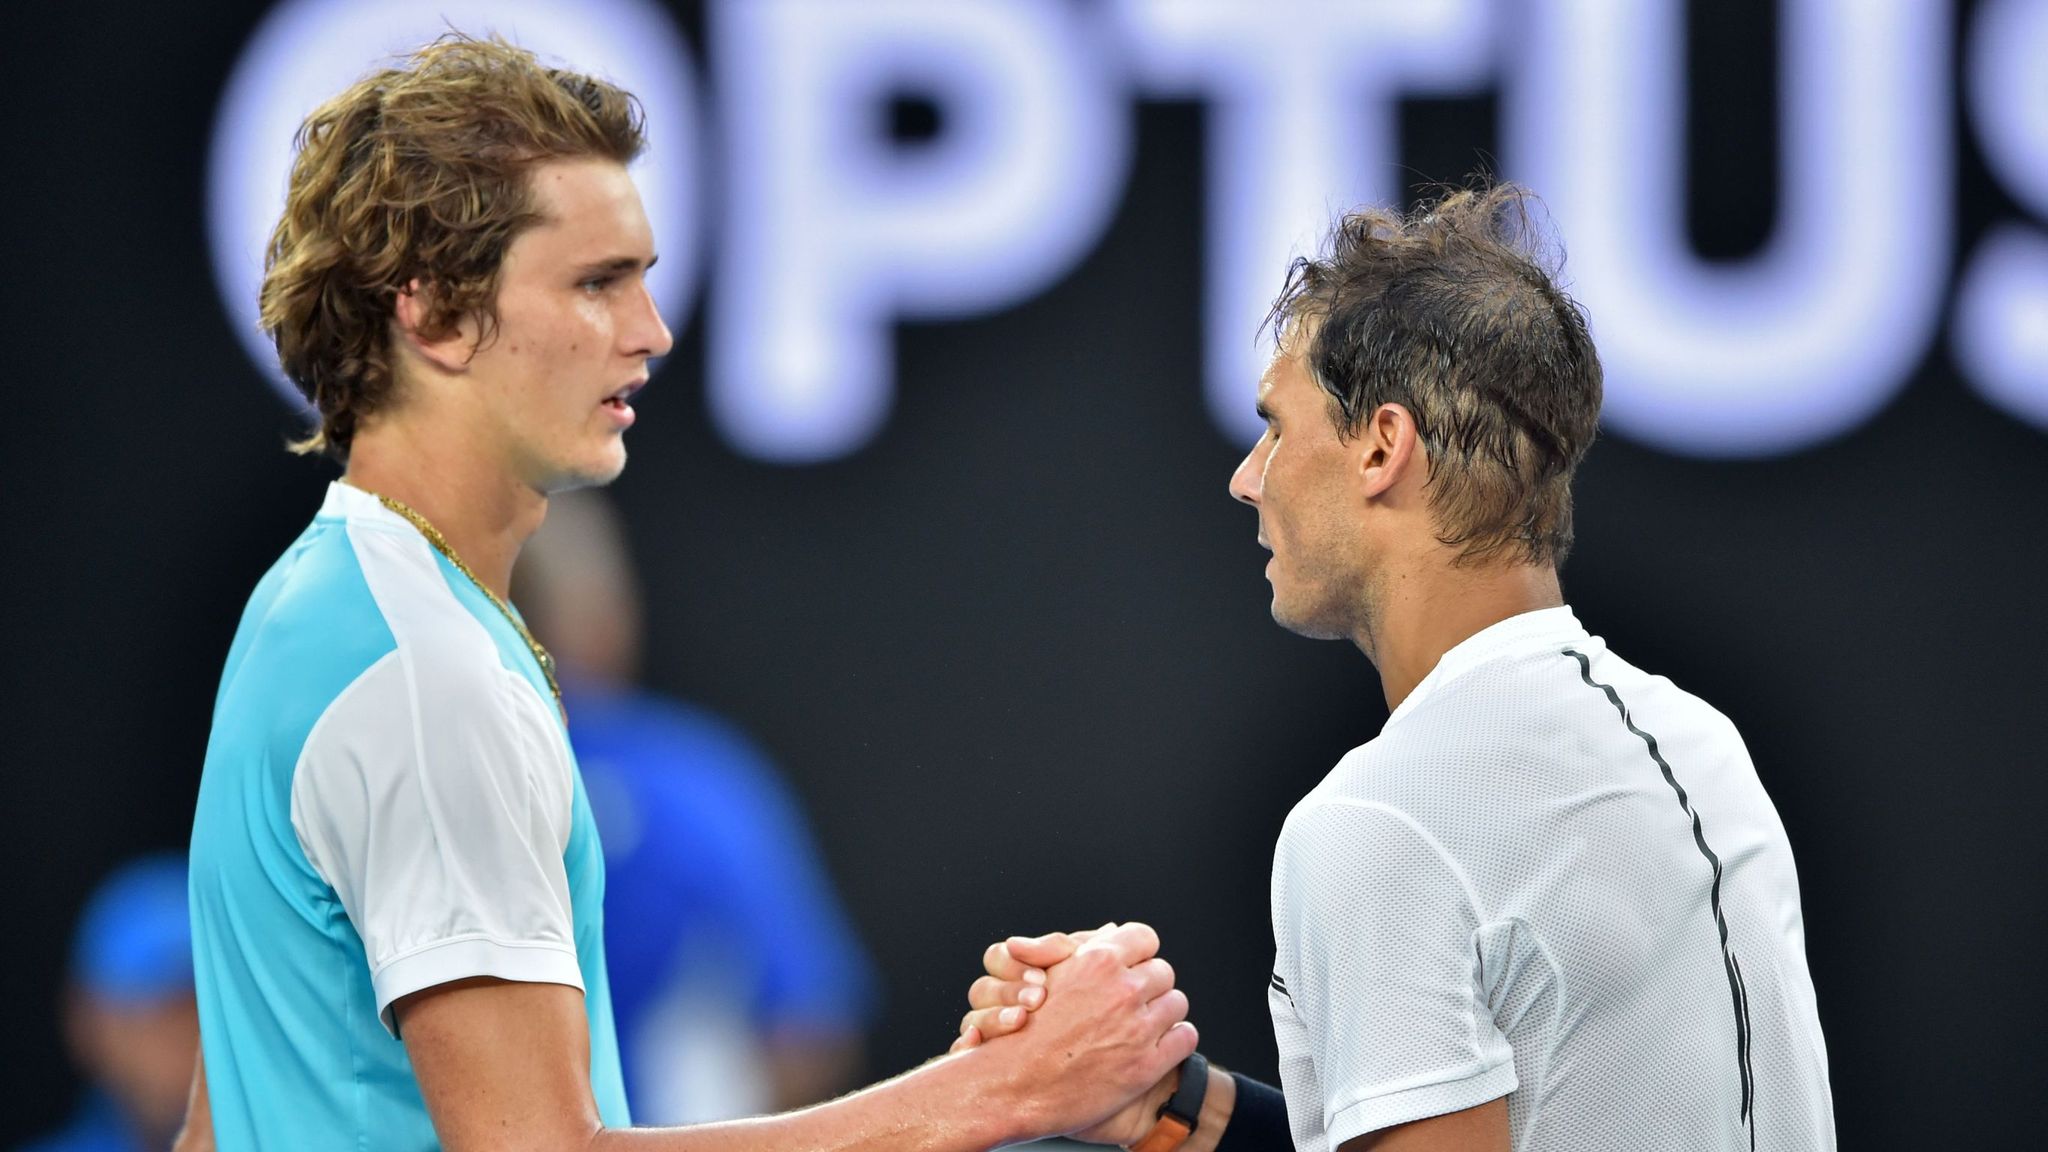 United Cup 2023: Rafael Nadal and Alexander Zverev practice together in Sydney ahead of their opening match in United Cup 2023 - Watch Video 